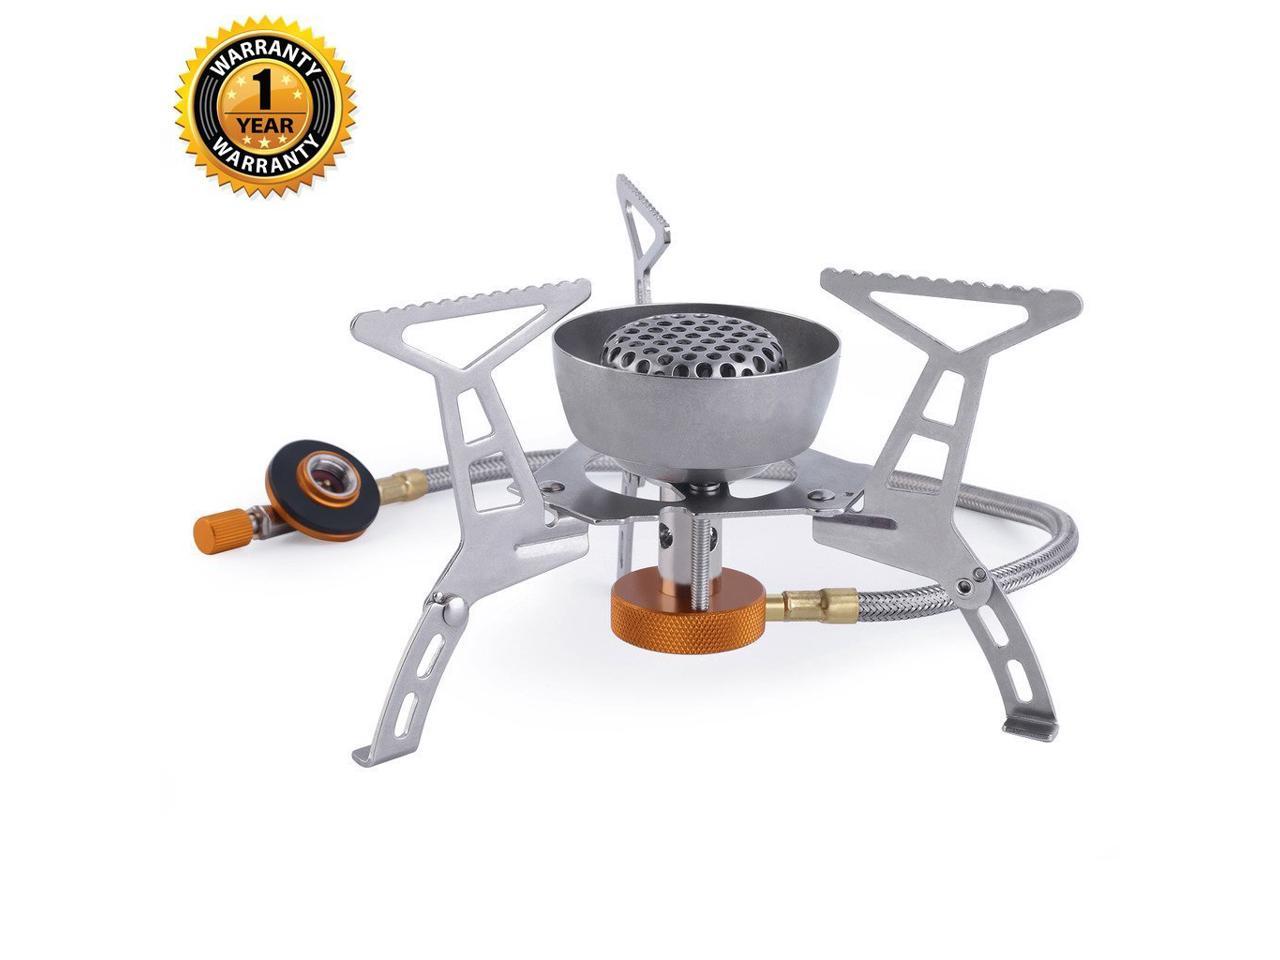 Portable Gas Burner Mini Stove Head Stainless Steel Outdoor Camping Hiking US